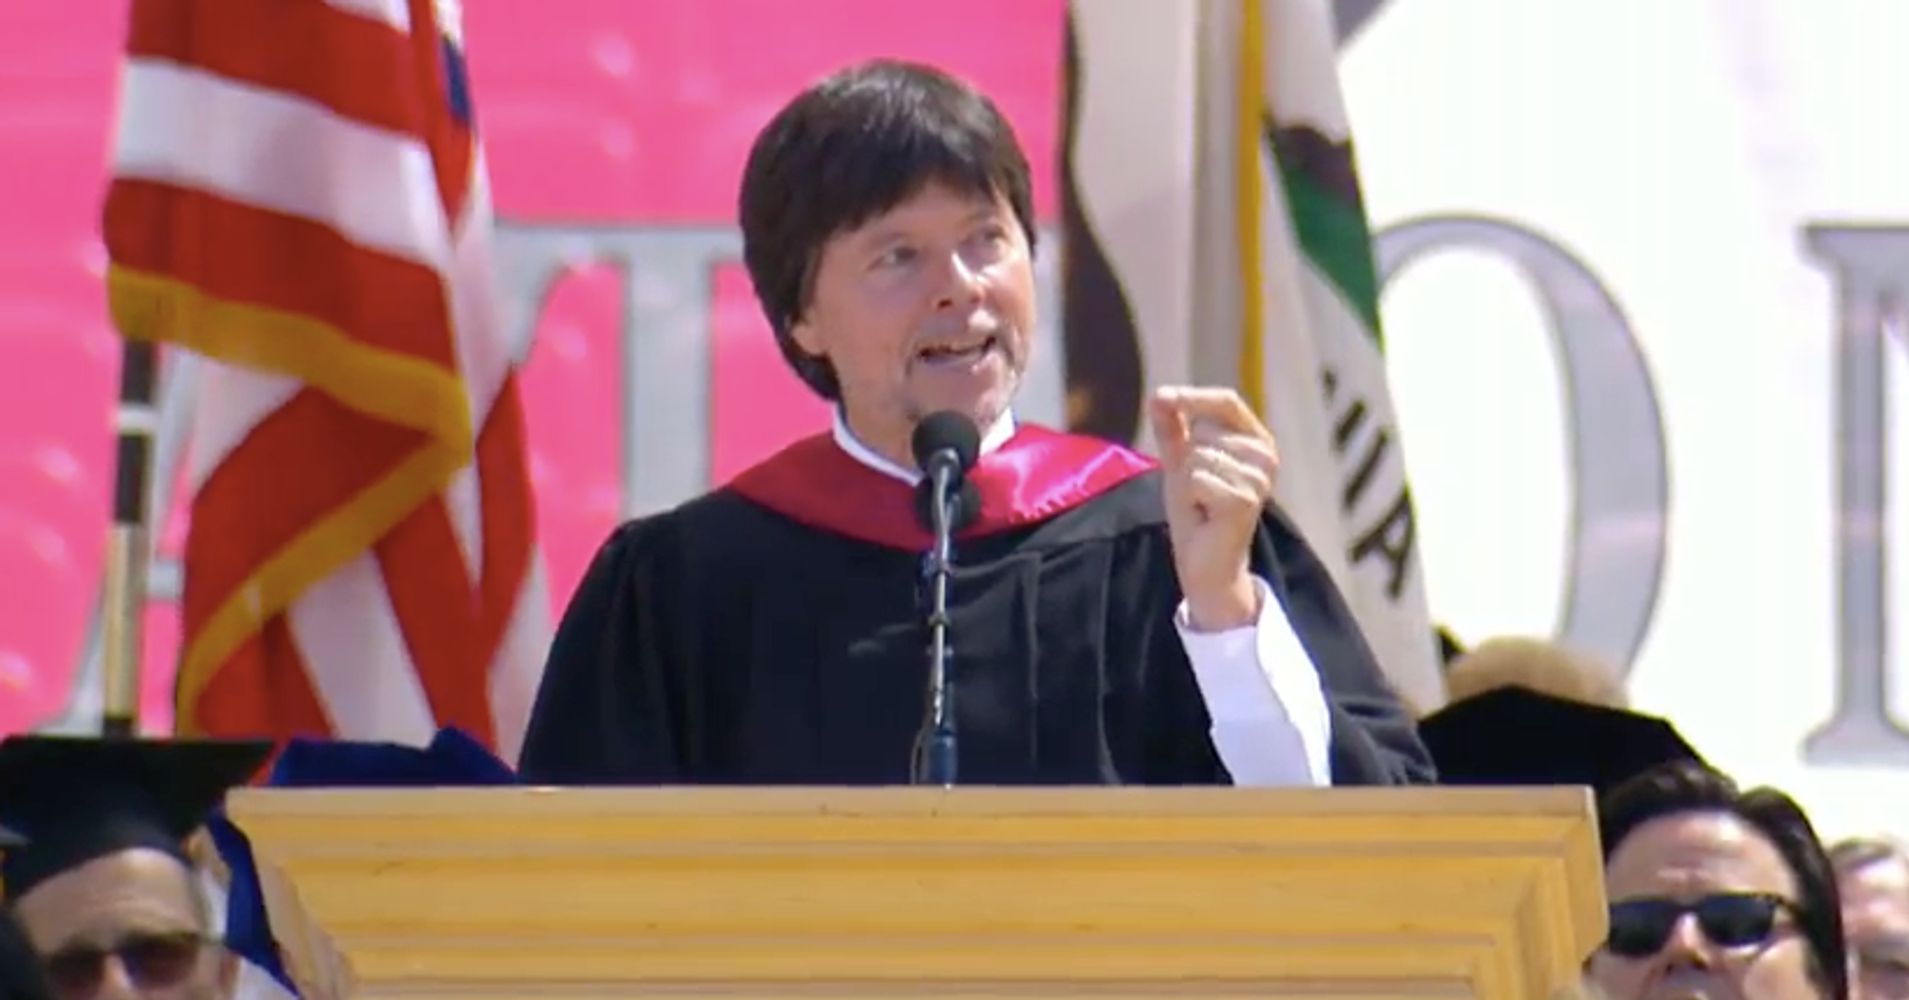 Ken Burns Offers Blistering Takedown Of Donald Trump In Stanford